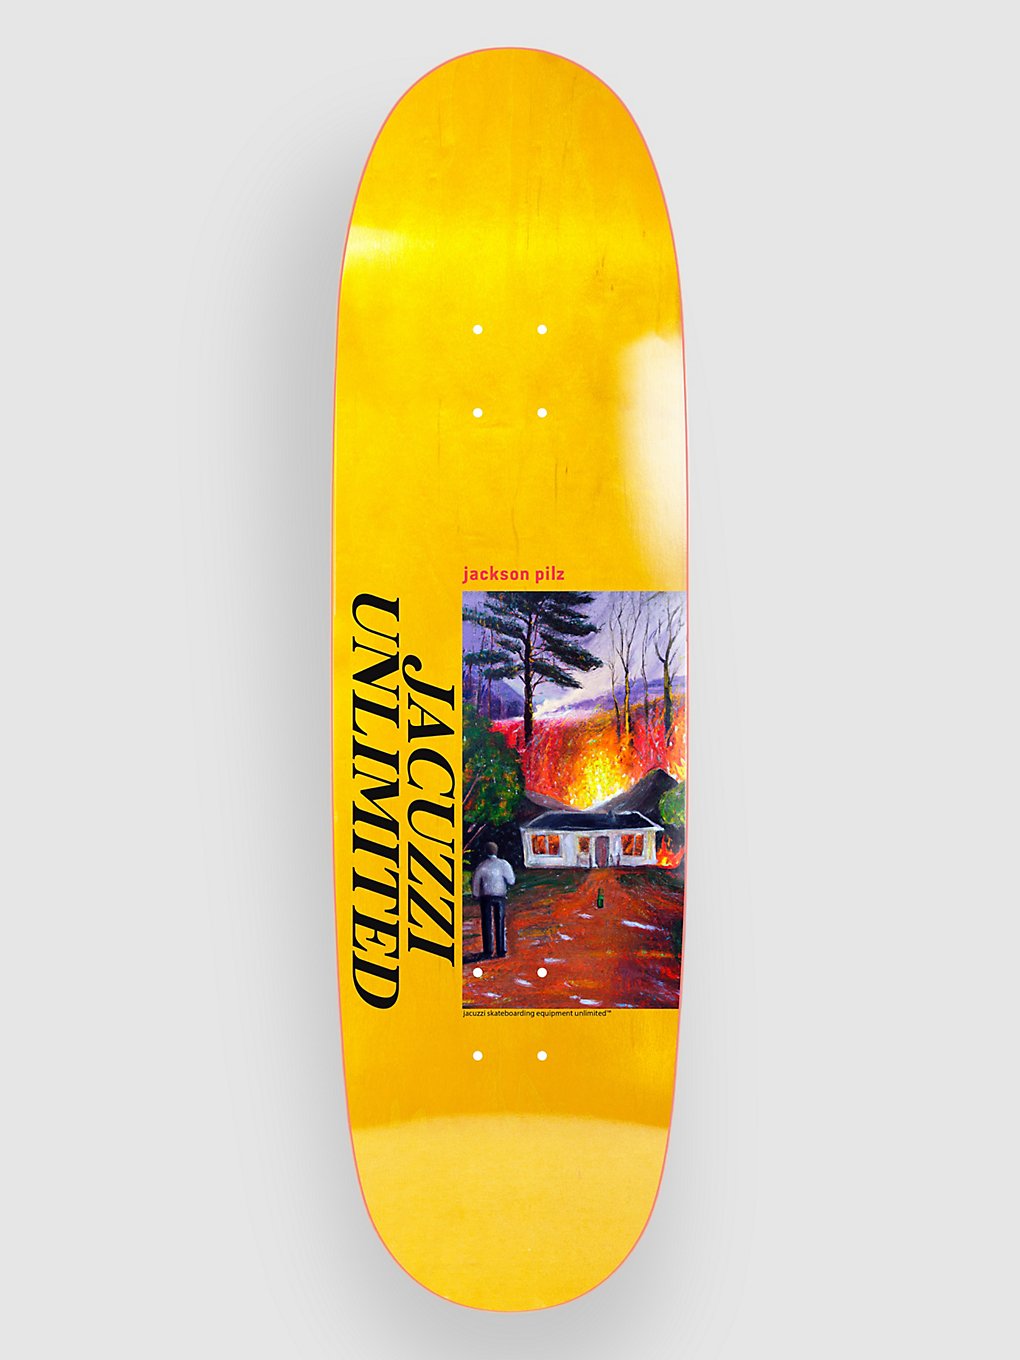 Image of Jacuzzi Unlimited Jackson Pilz Lawn Fire 9.125" Skateboard Deck giallo